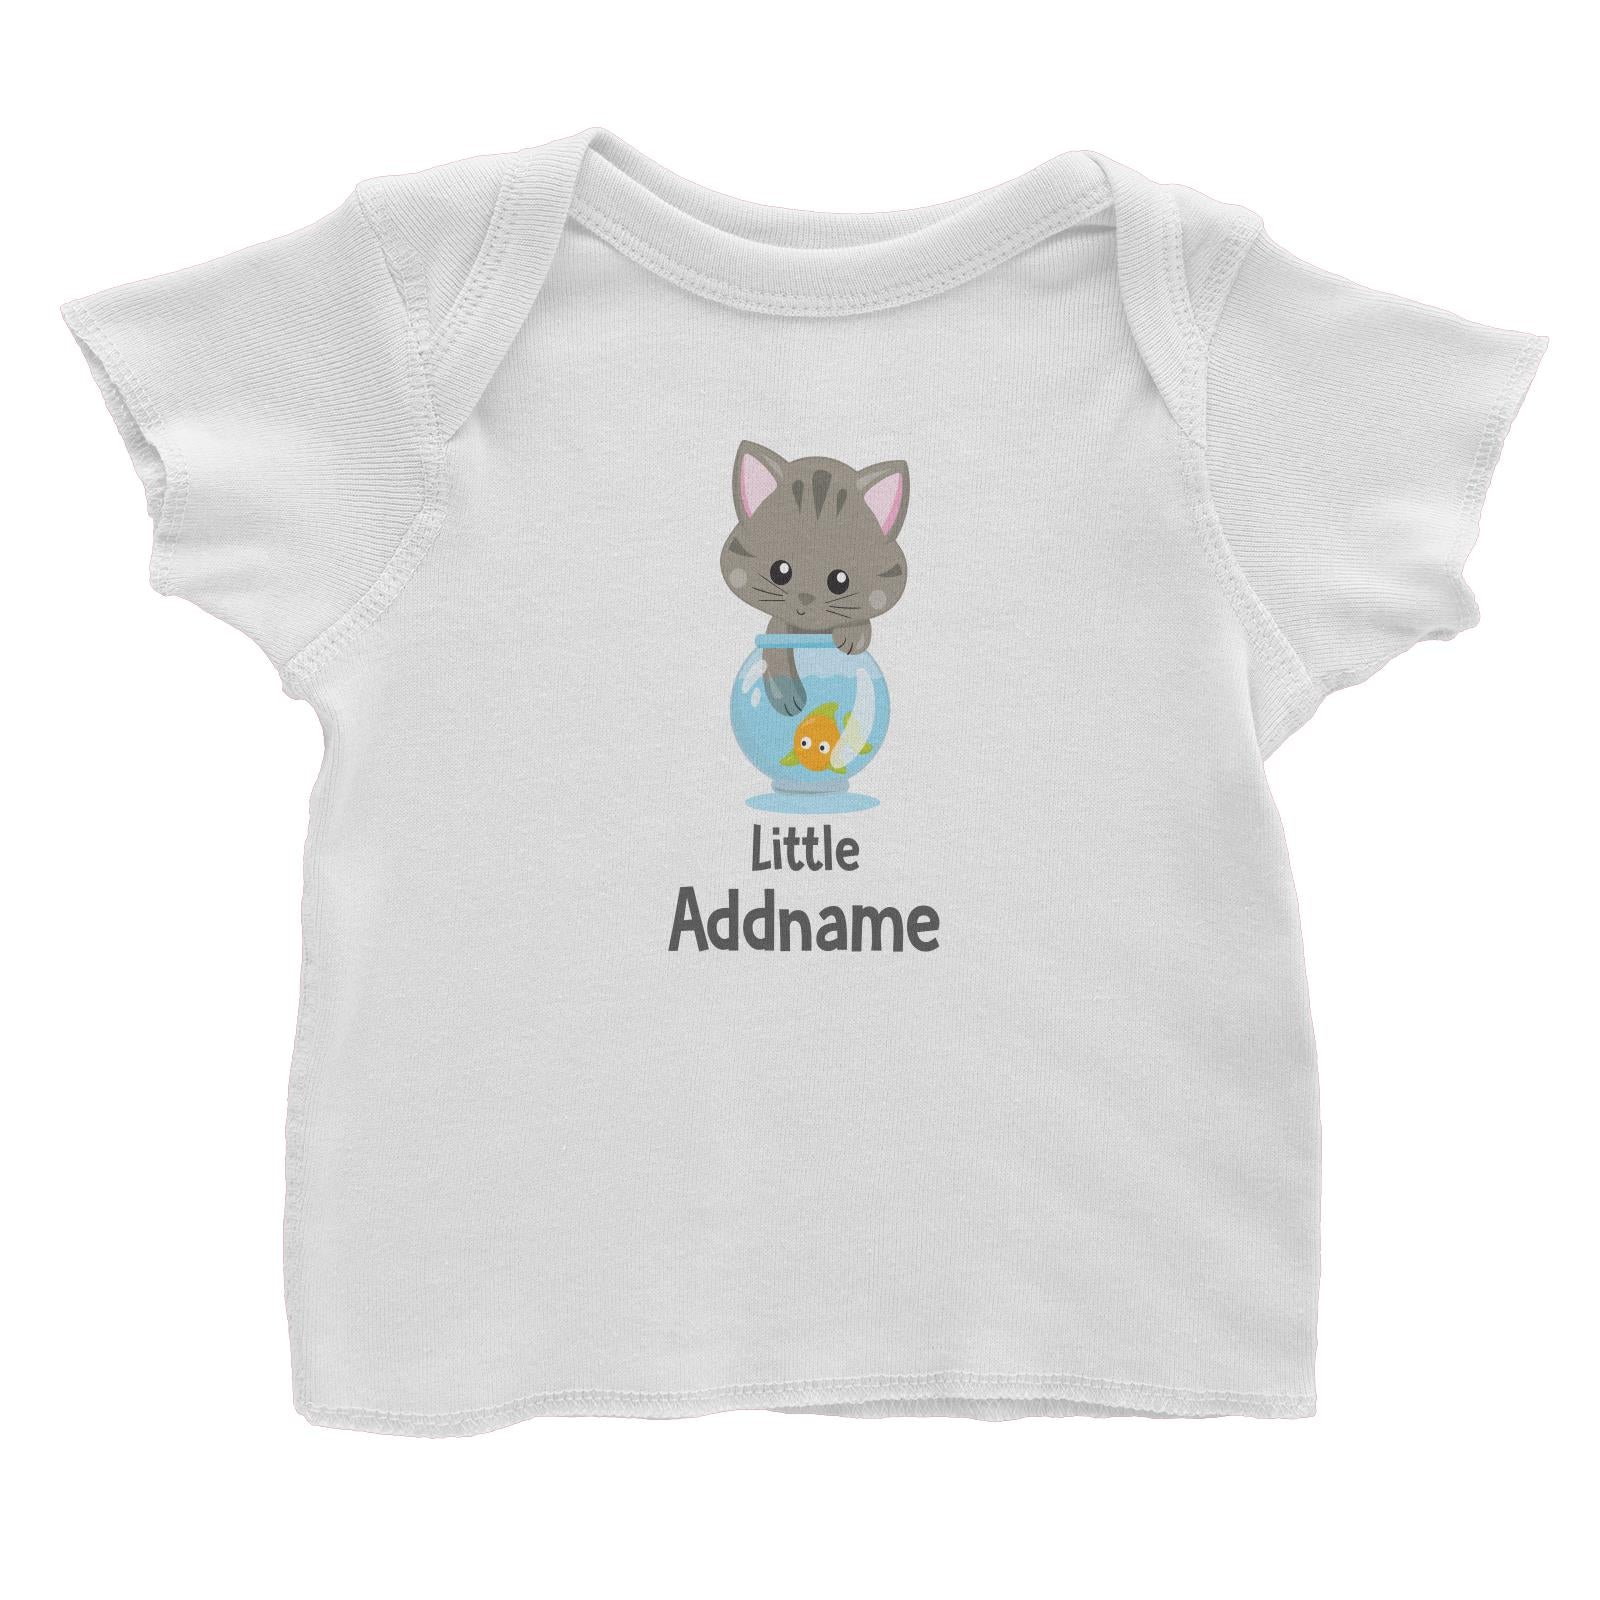 Adorable Cats Grey Cat Playing With Fish Bowl Little Addname Baby T-Shirt